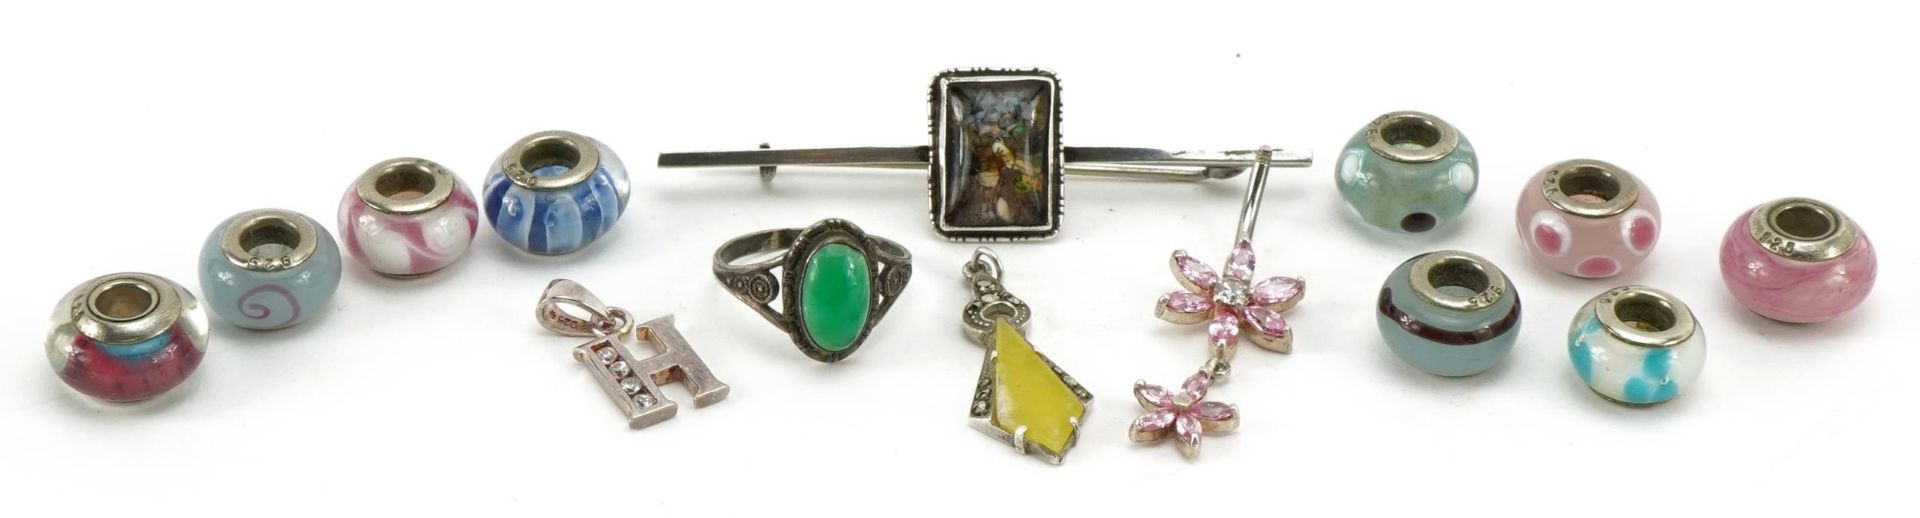 Silver jewellery including cabochon green stone ring, beads and bar brooch, total 29.8g